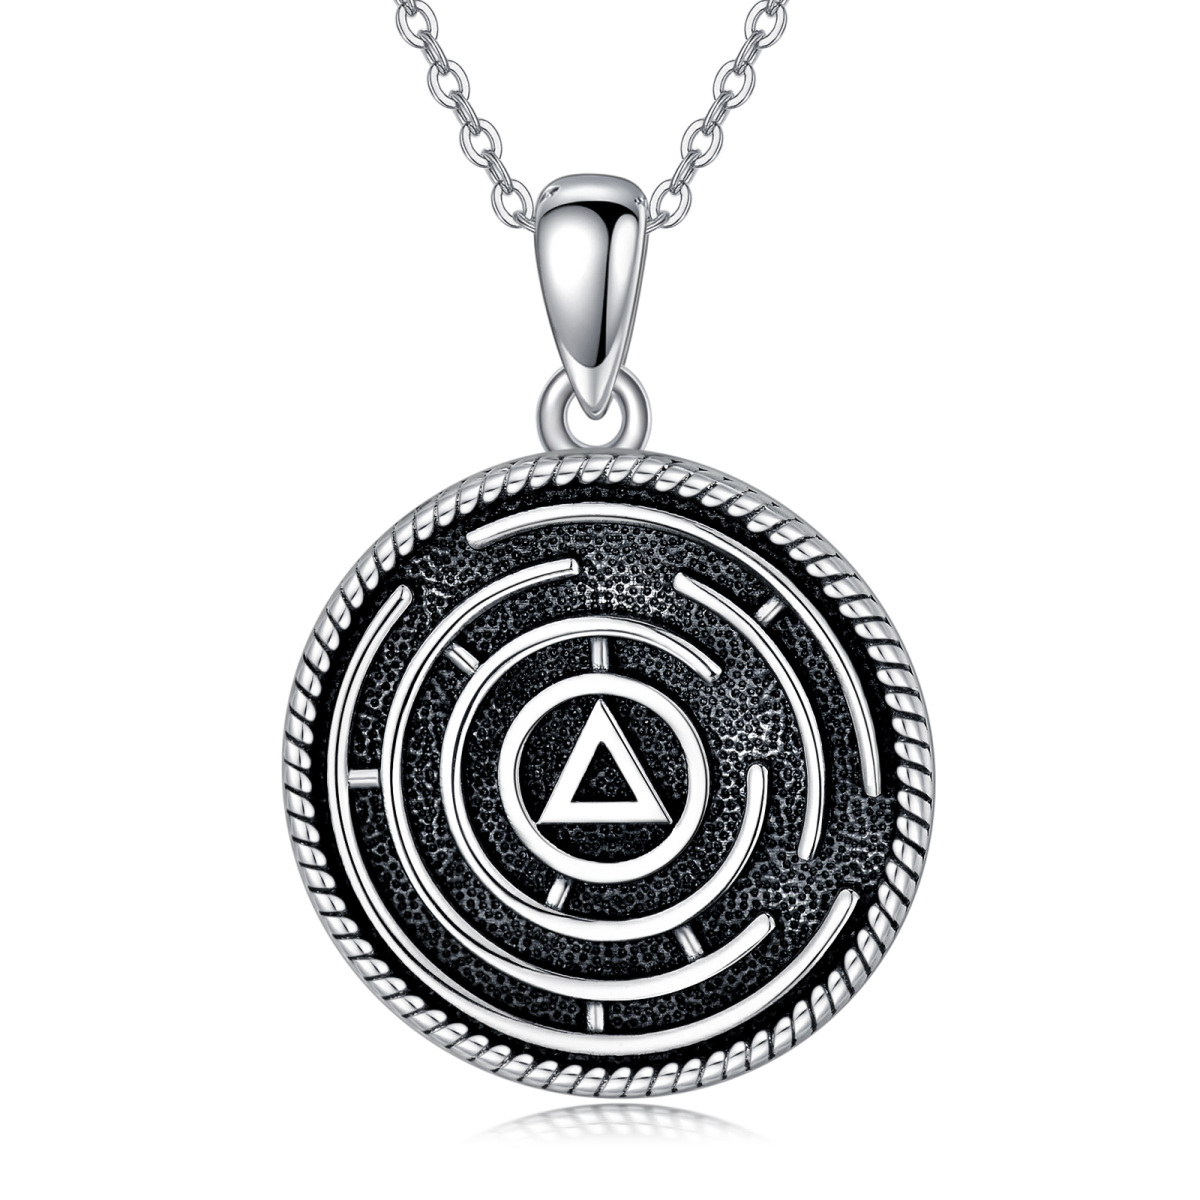 Sterling Silver AA Alcoholics Anonymous Pendant Necklace-1